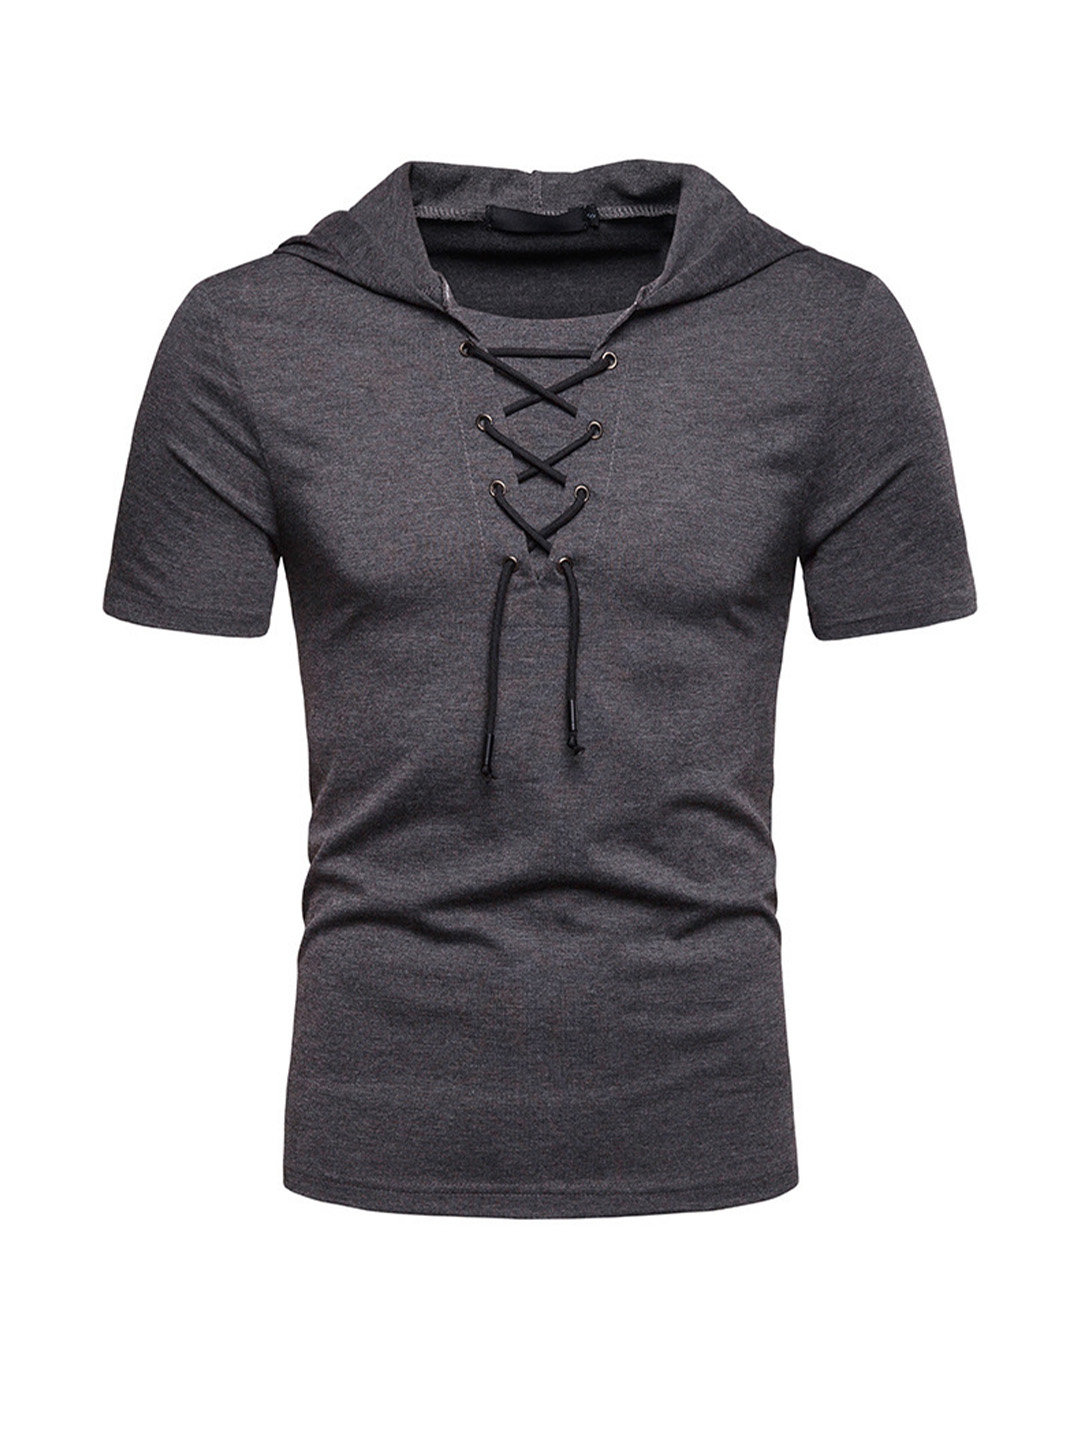 summer foreign trade new style men's hooded tie woven collar t-shirt european code loose solid color short-sleeved t-shirt